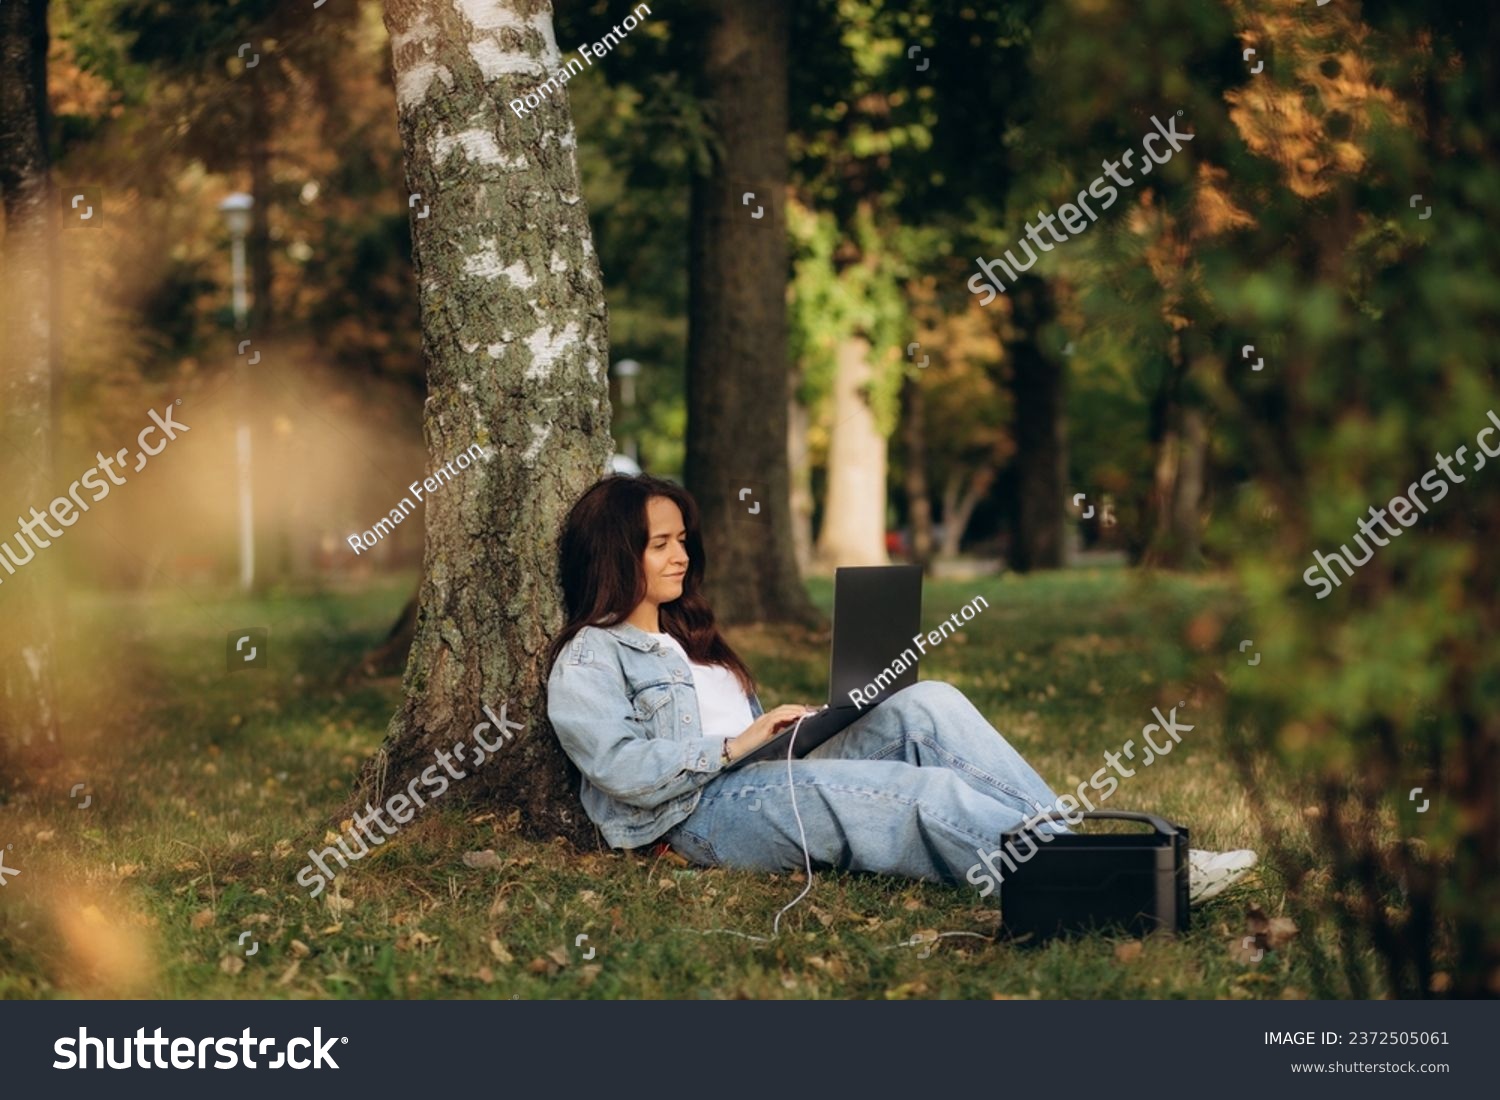 A woman in nature works on a laptop charging from a portable charging station #2372505061